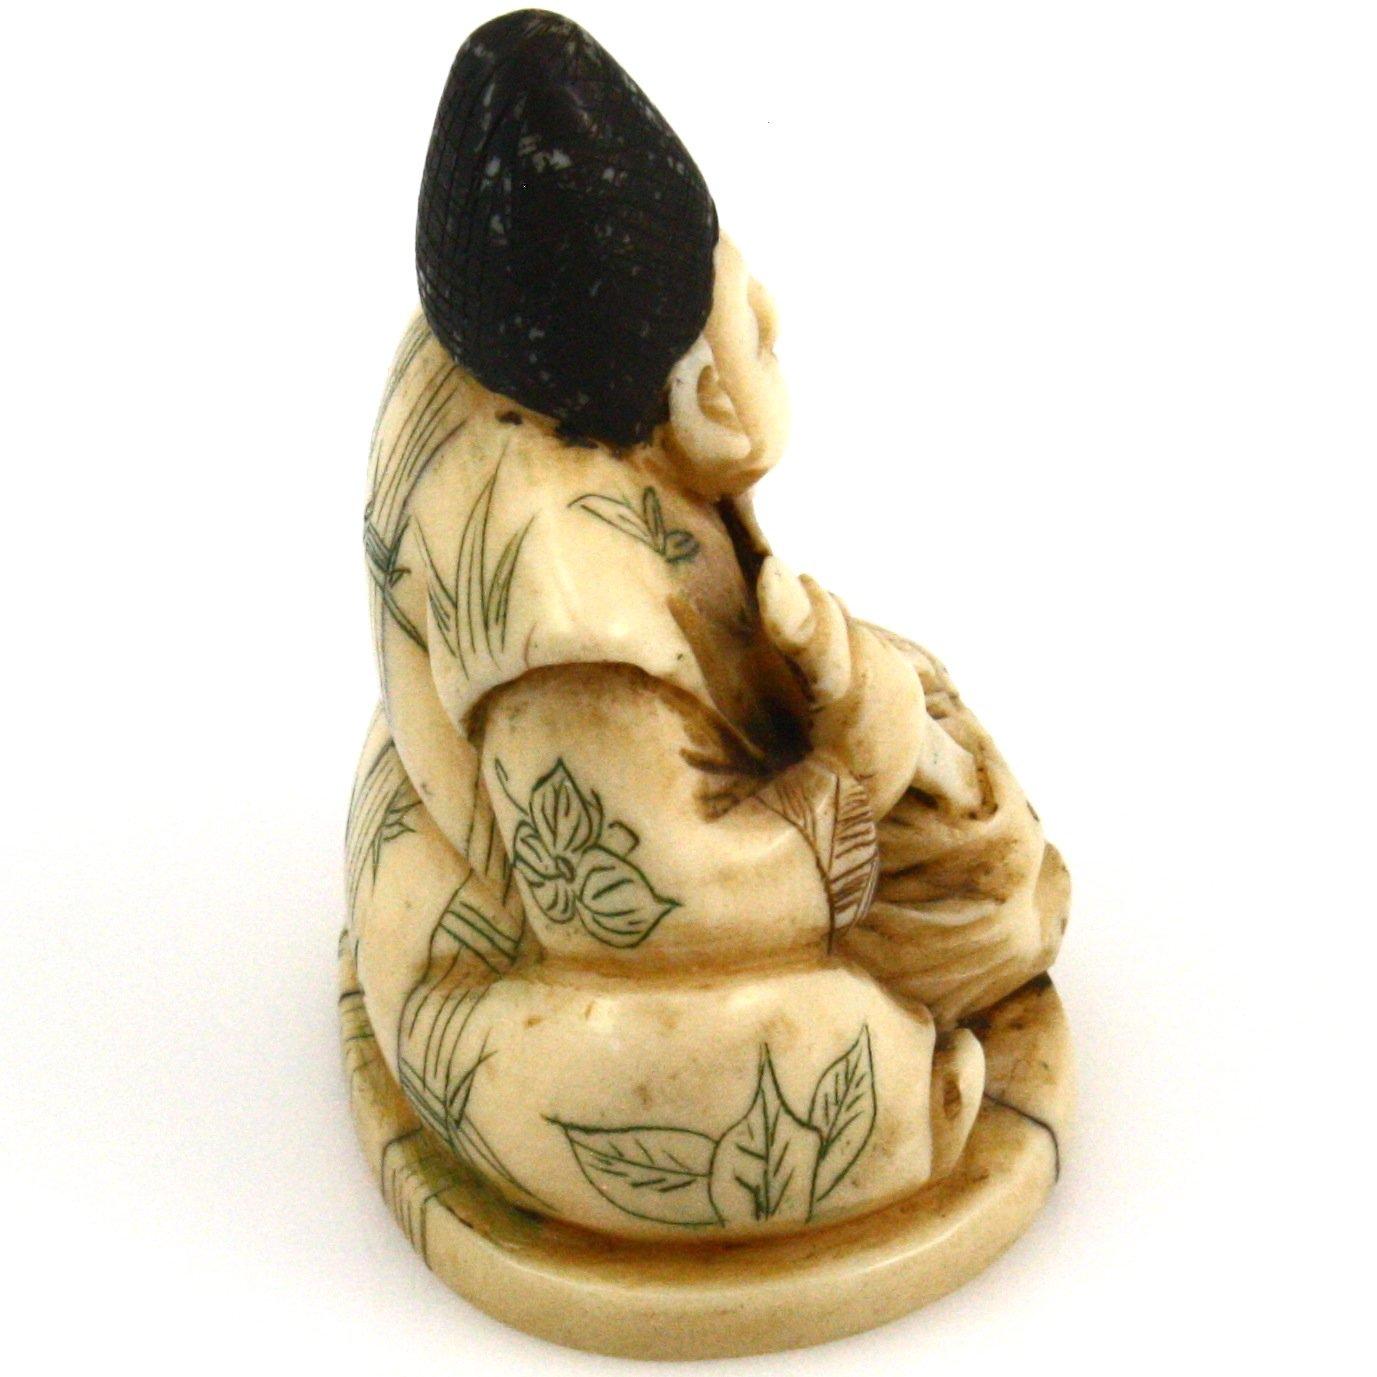 Vintage genuine hand-carved ivory Chinese man playing with rats figurine